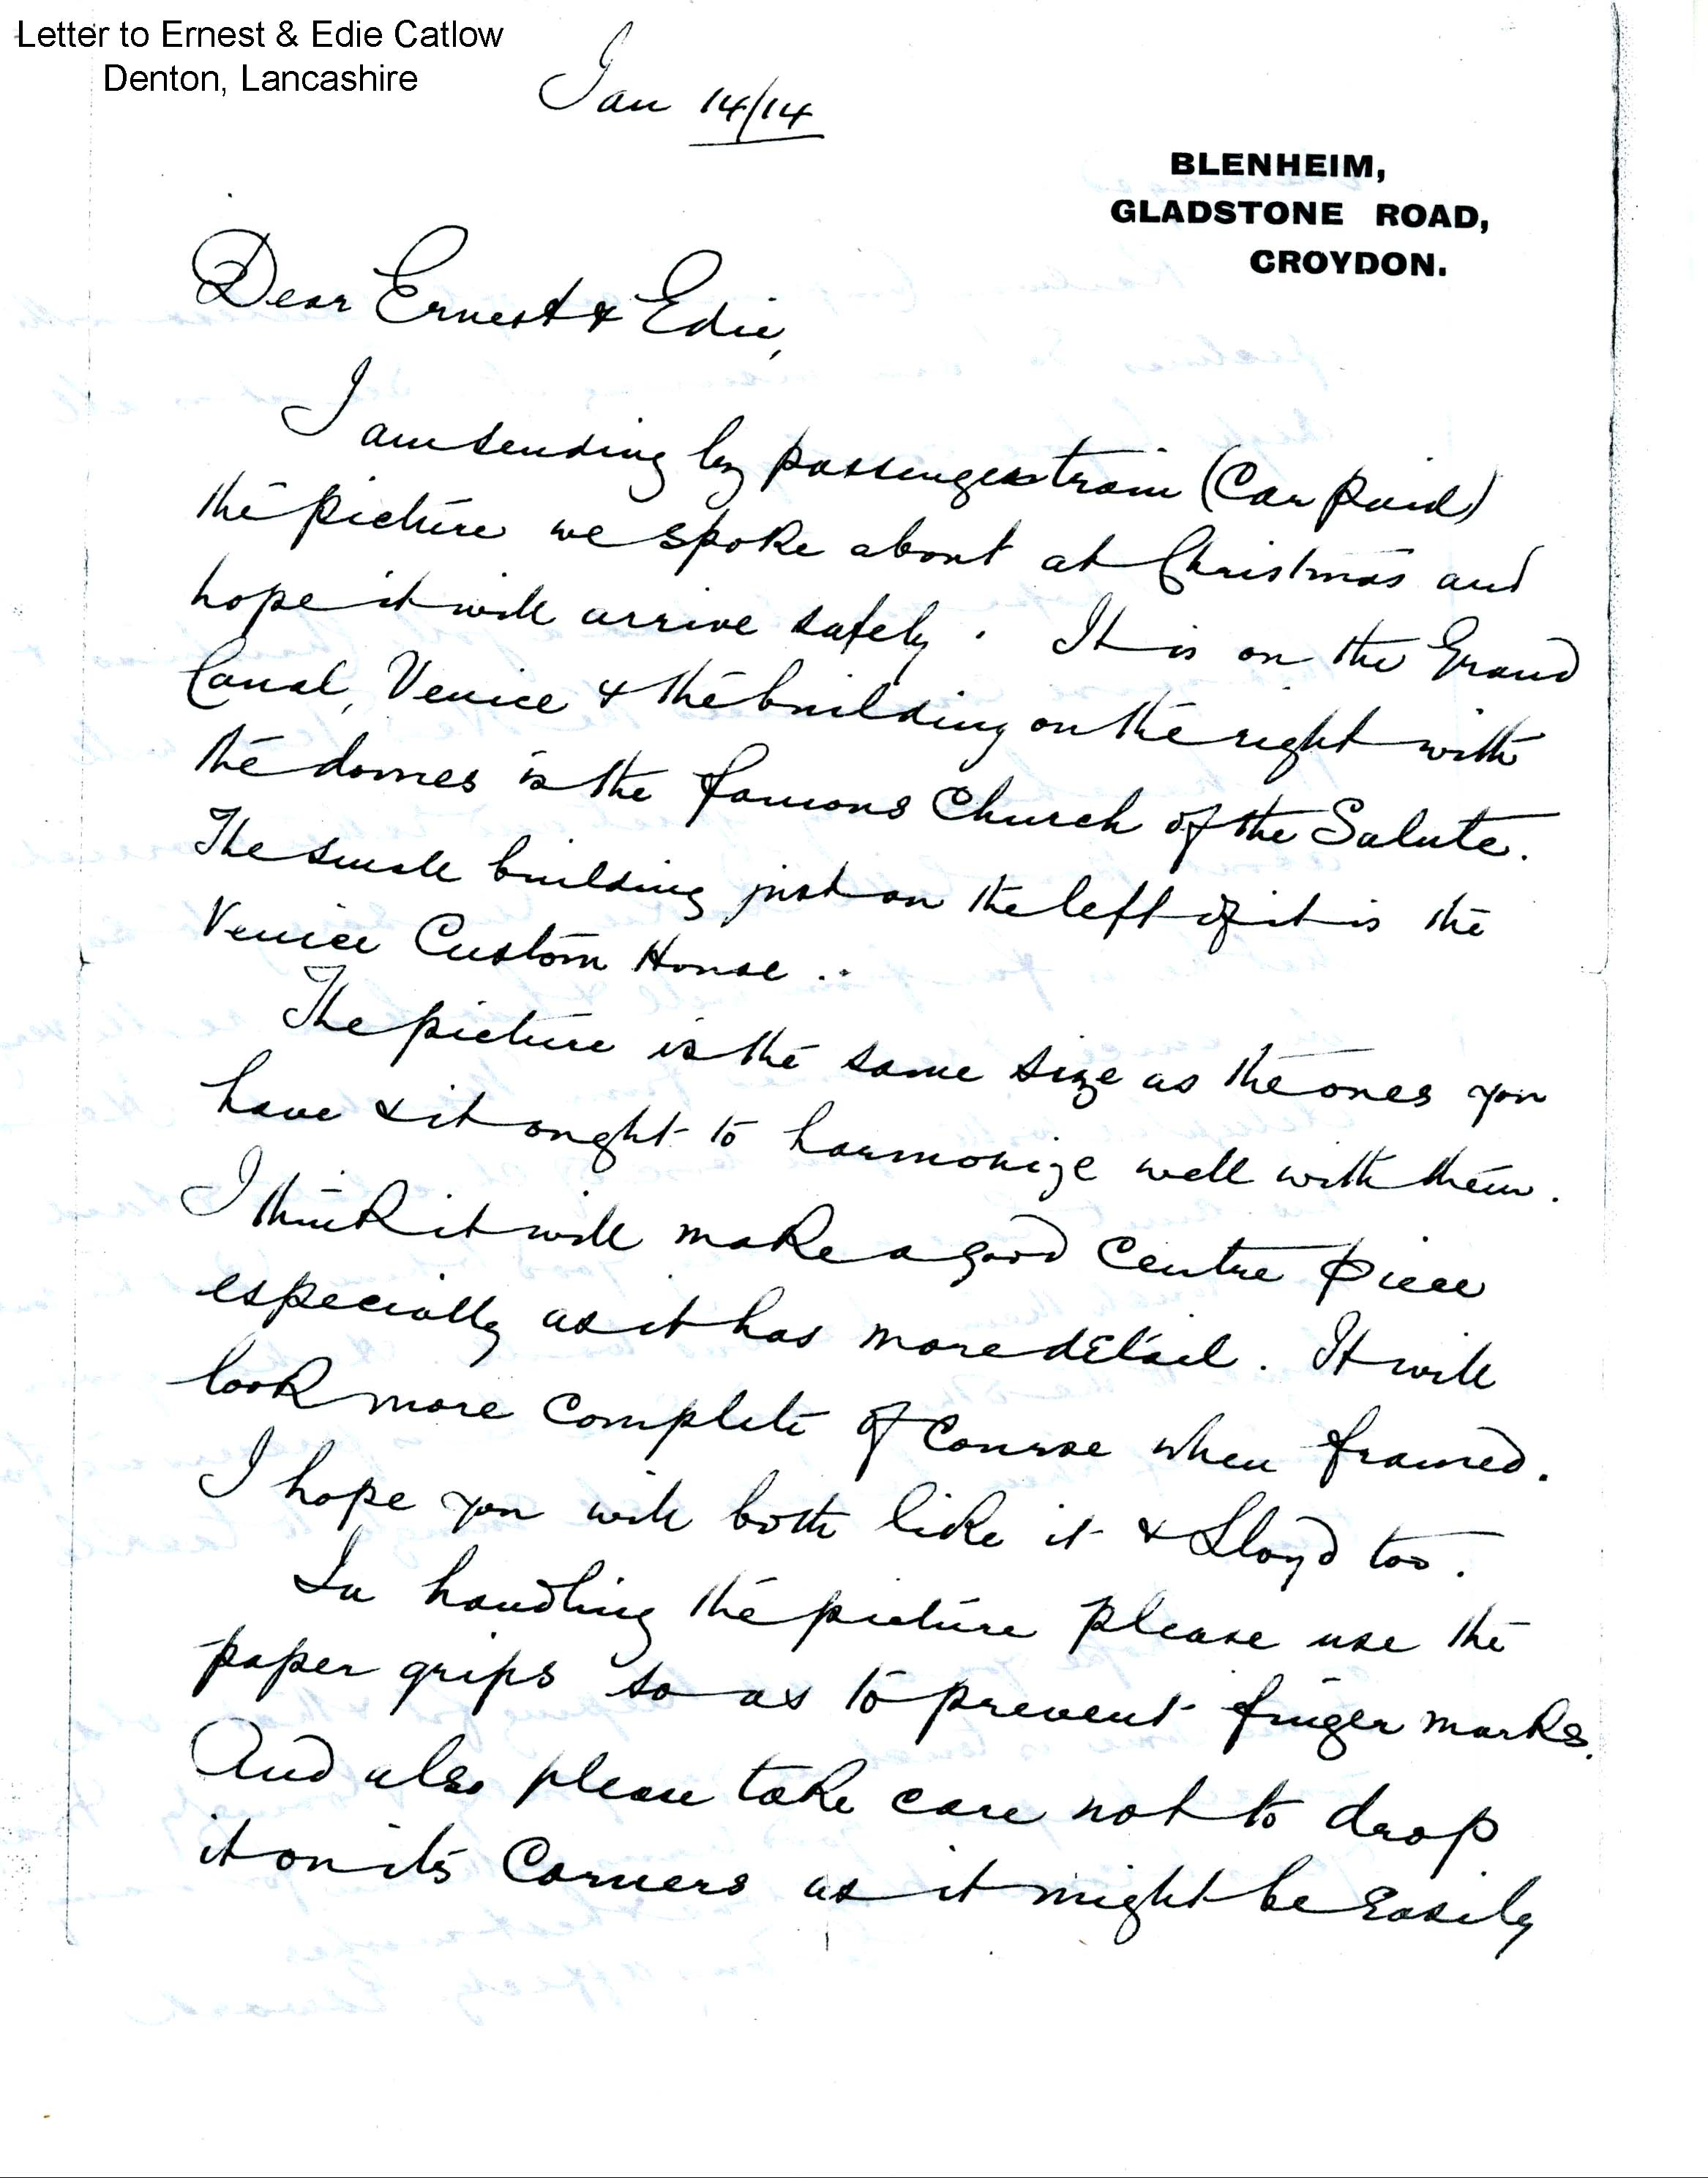 Letter from EBW to Ernest & Edie Catlow